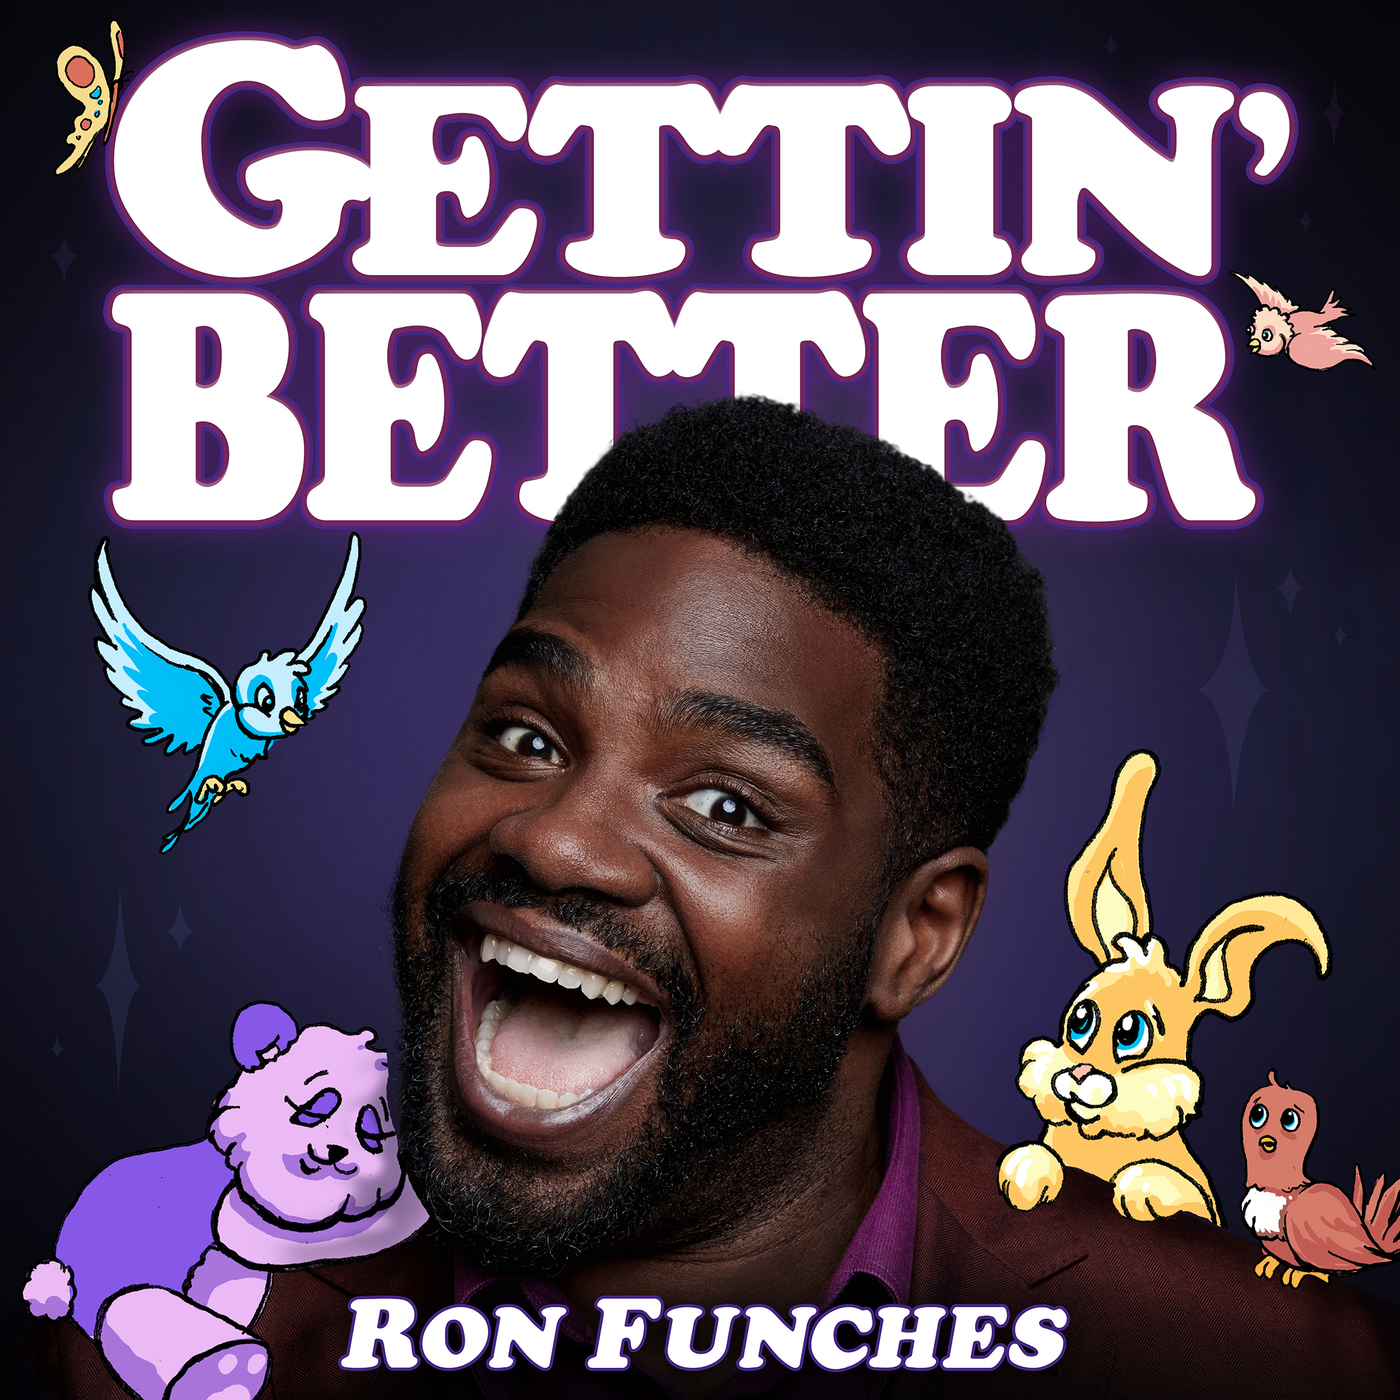 Gettin' Better with Ron Funches #242 - Solo Funch